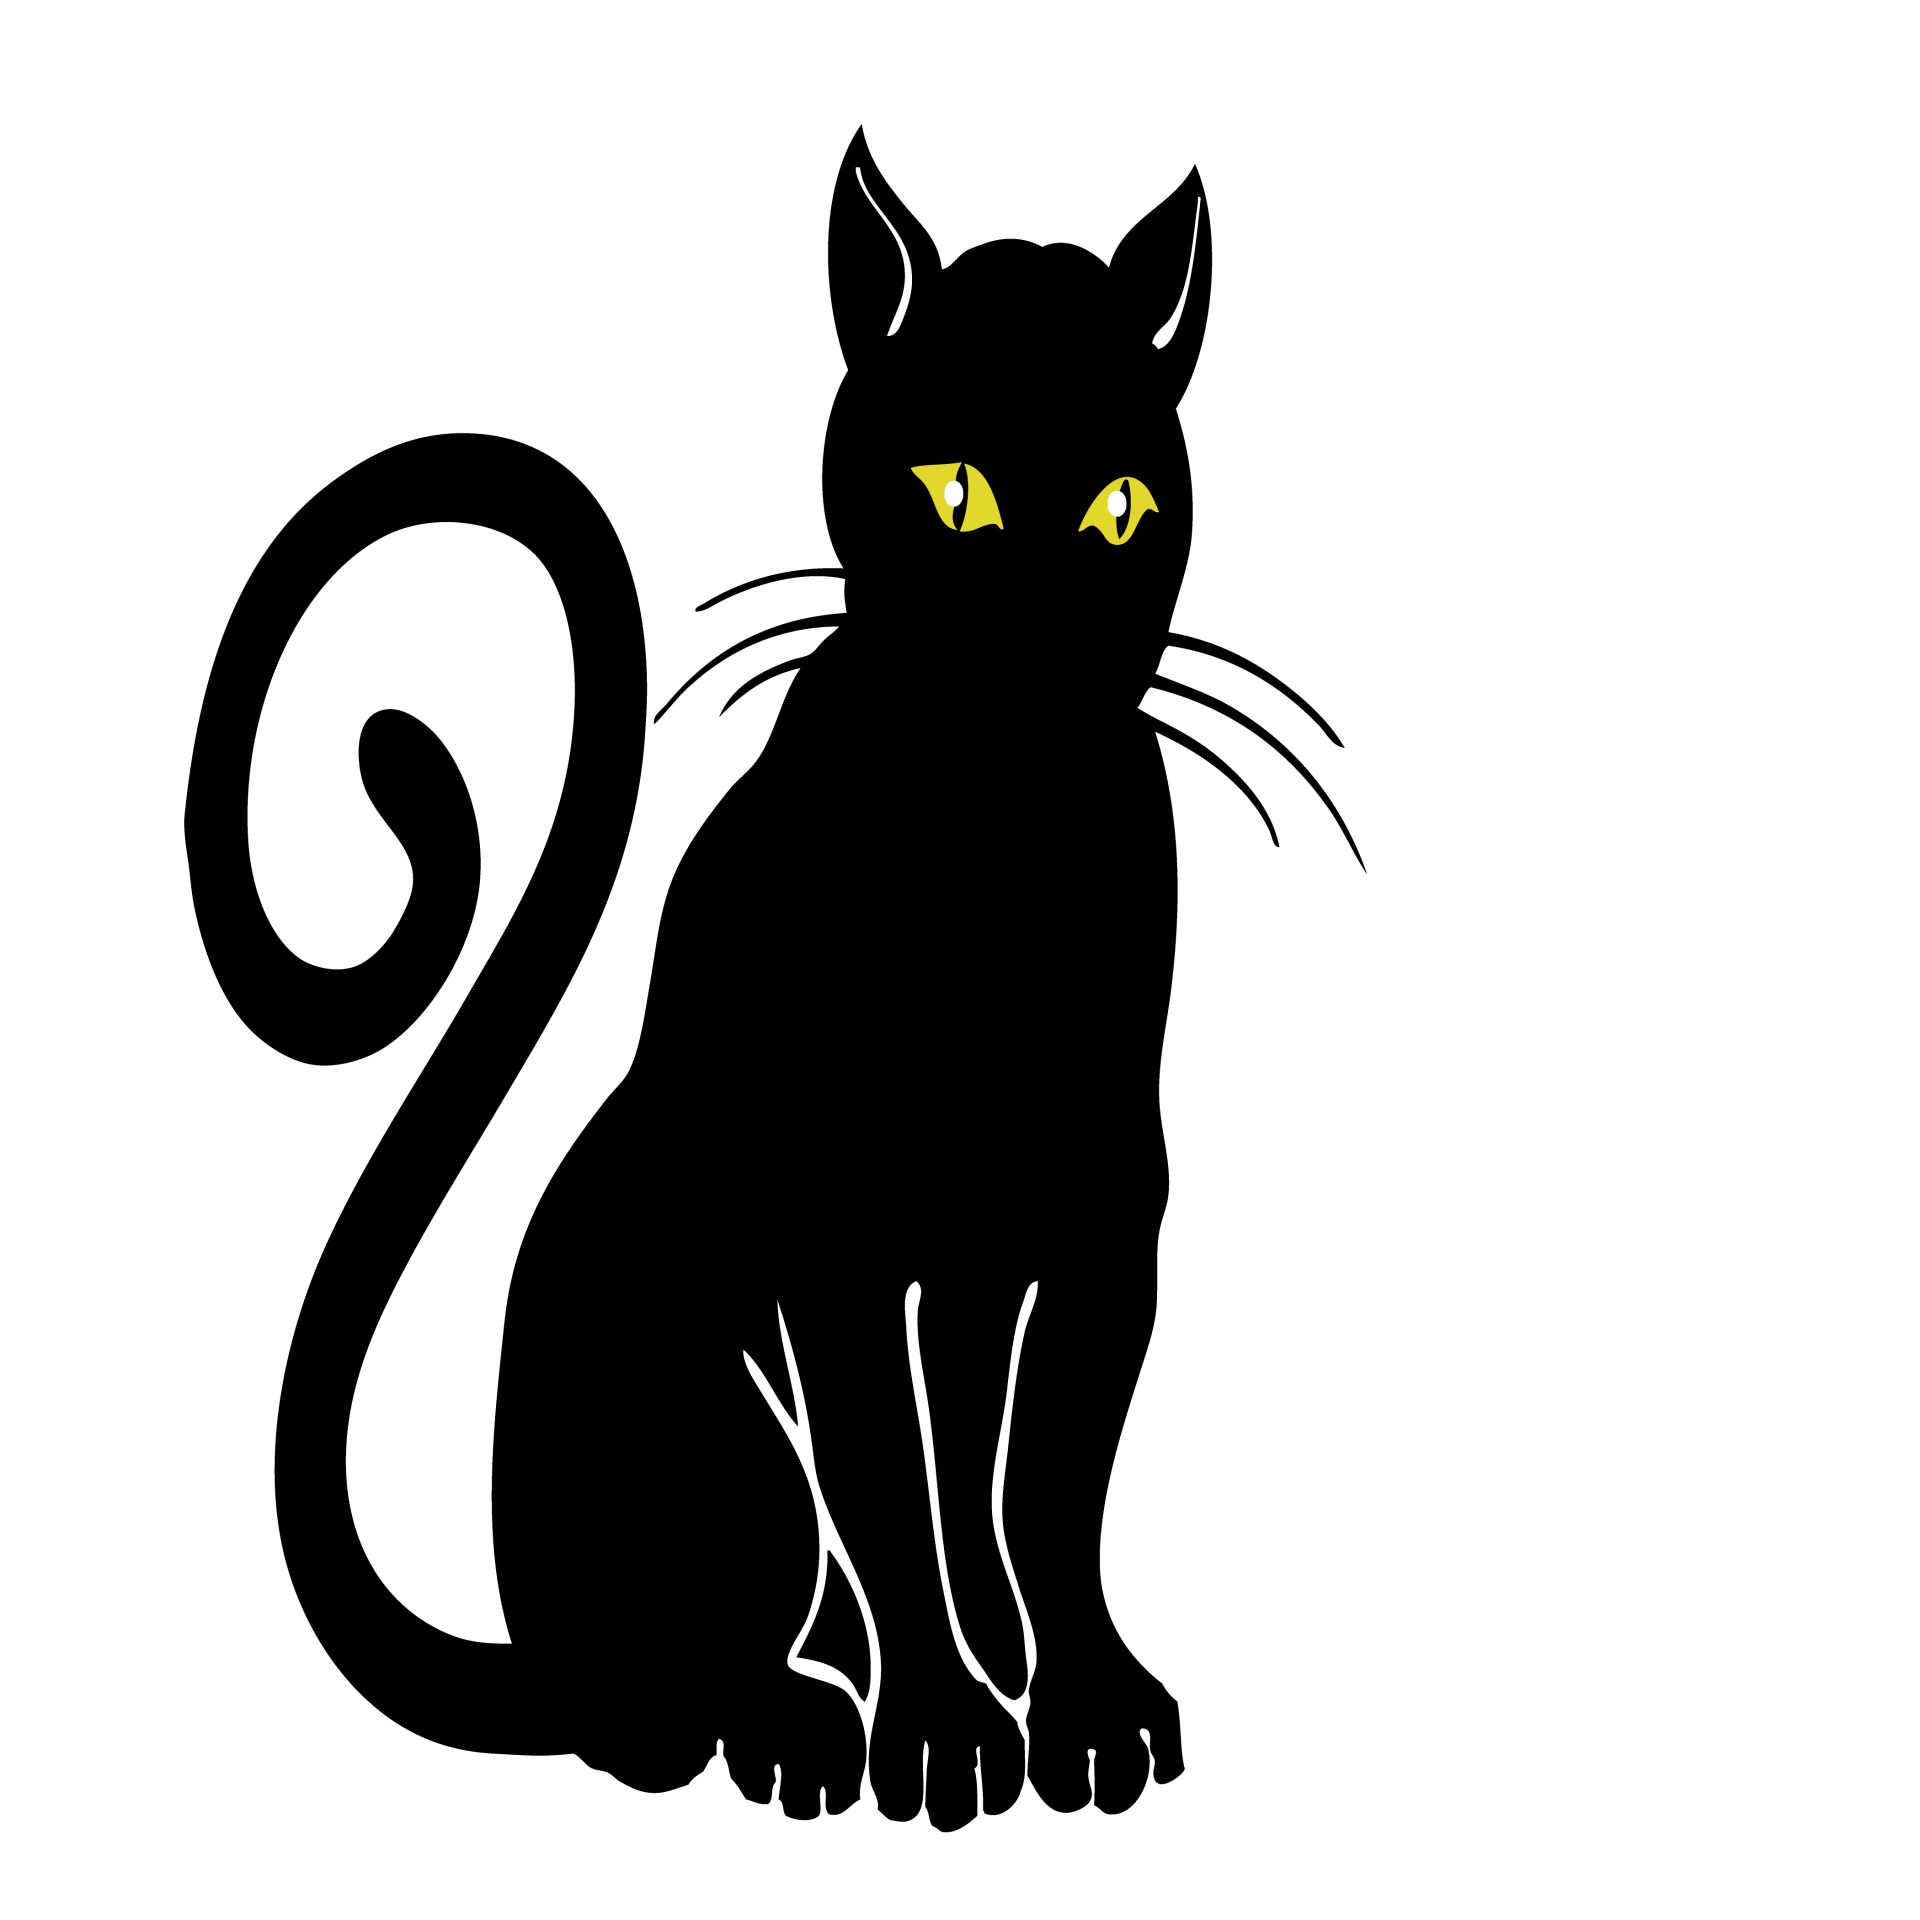 Illustration of black cat with yellow eyes clipart ideal for halloween